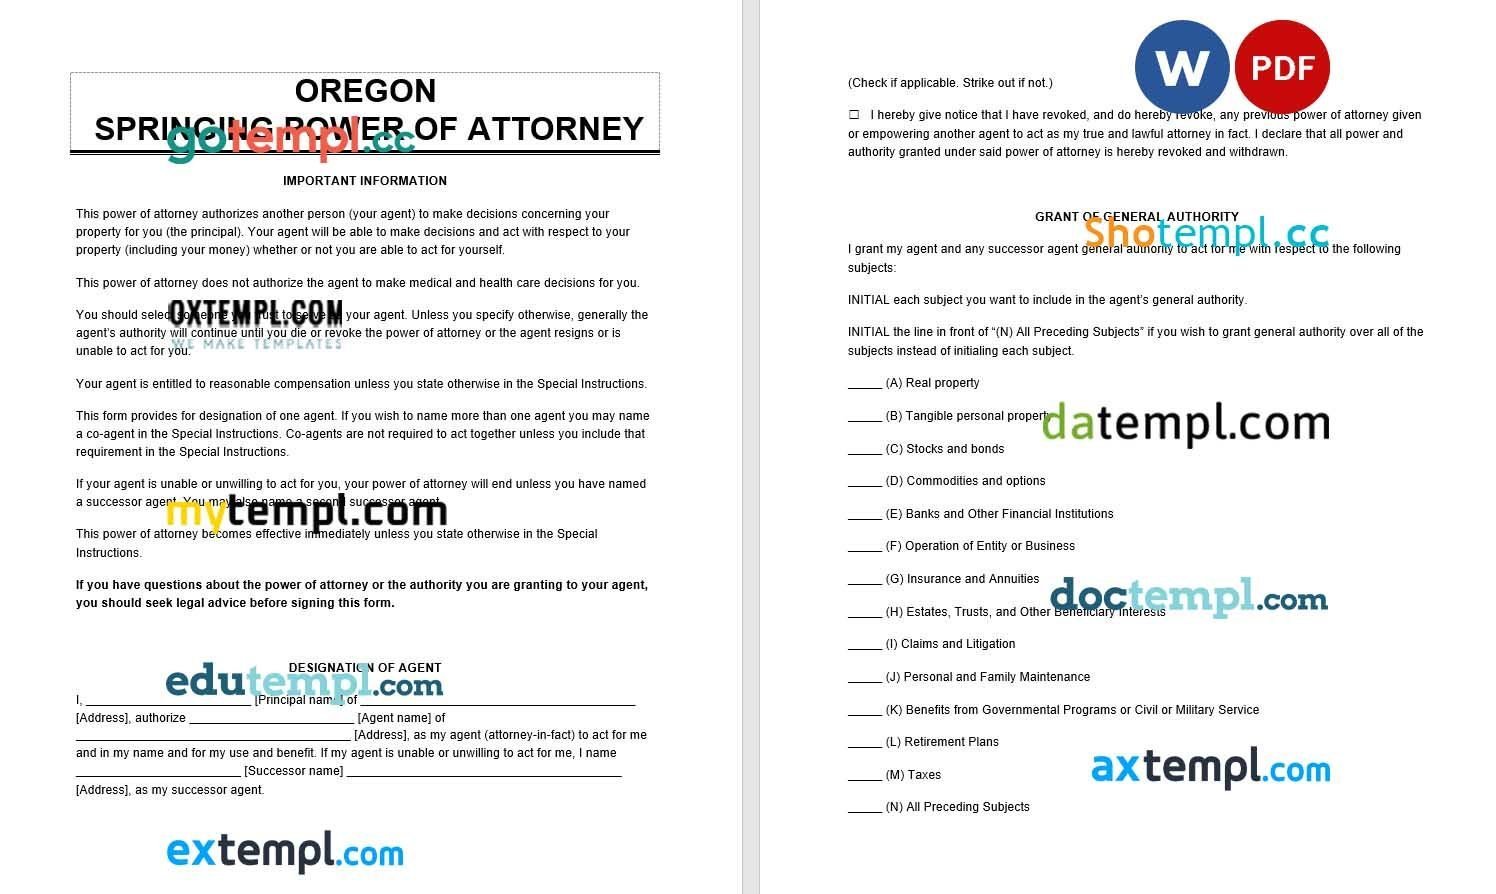 Oregon Springing Power of Attorney example, fully editable